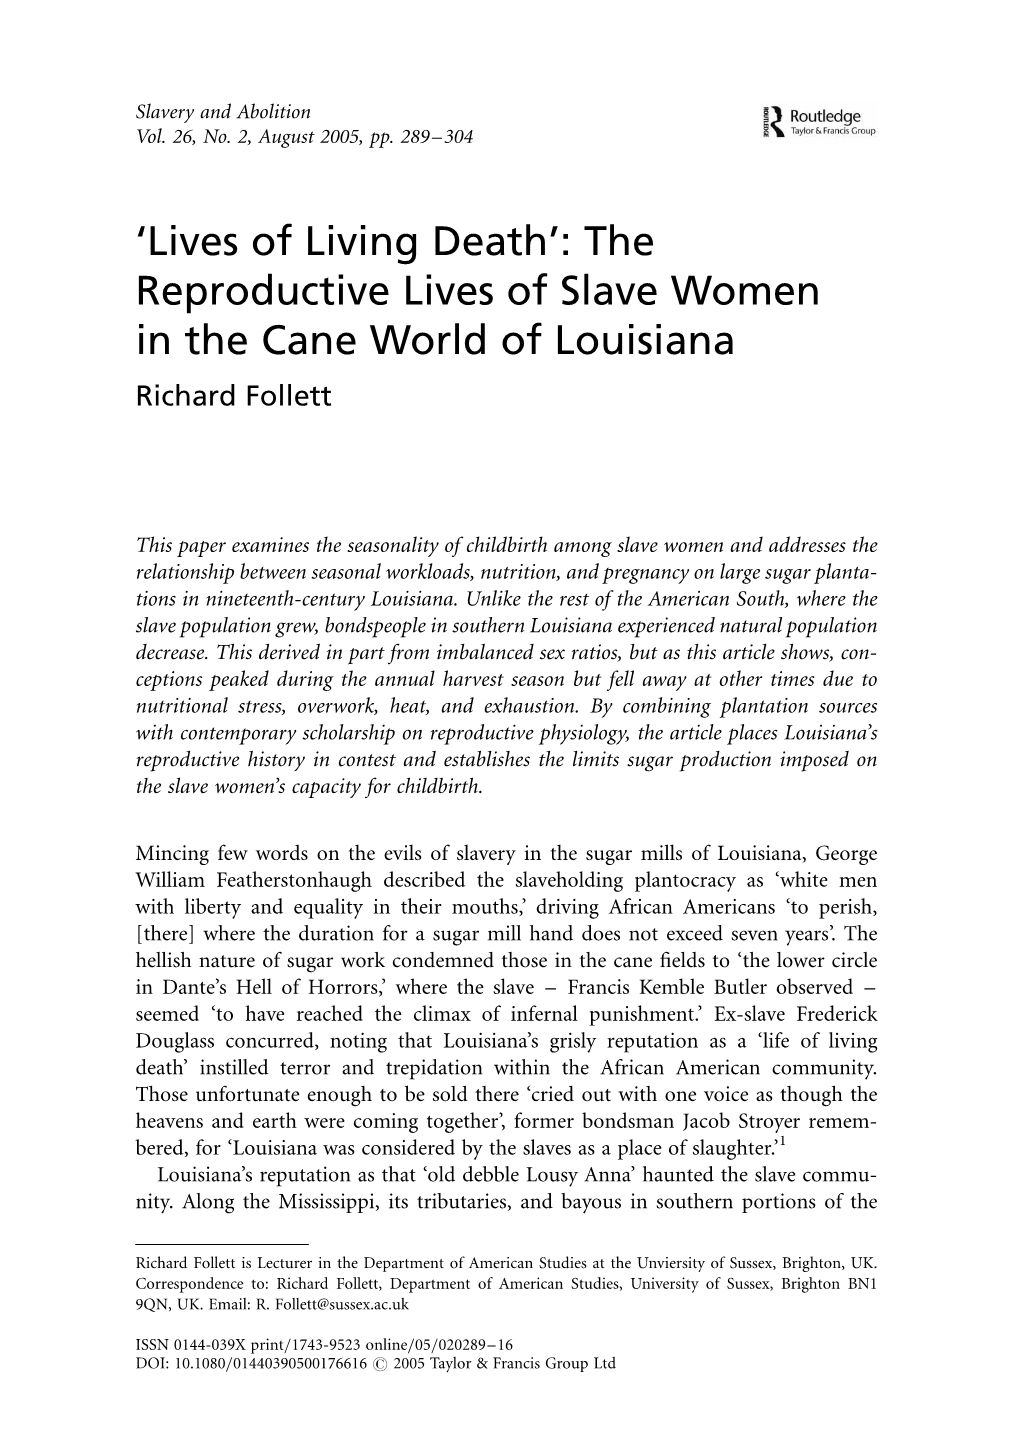 The Reproductive Lives of Slave Women in the Cane World of Louisiana Richard Follett